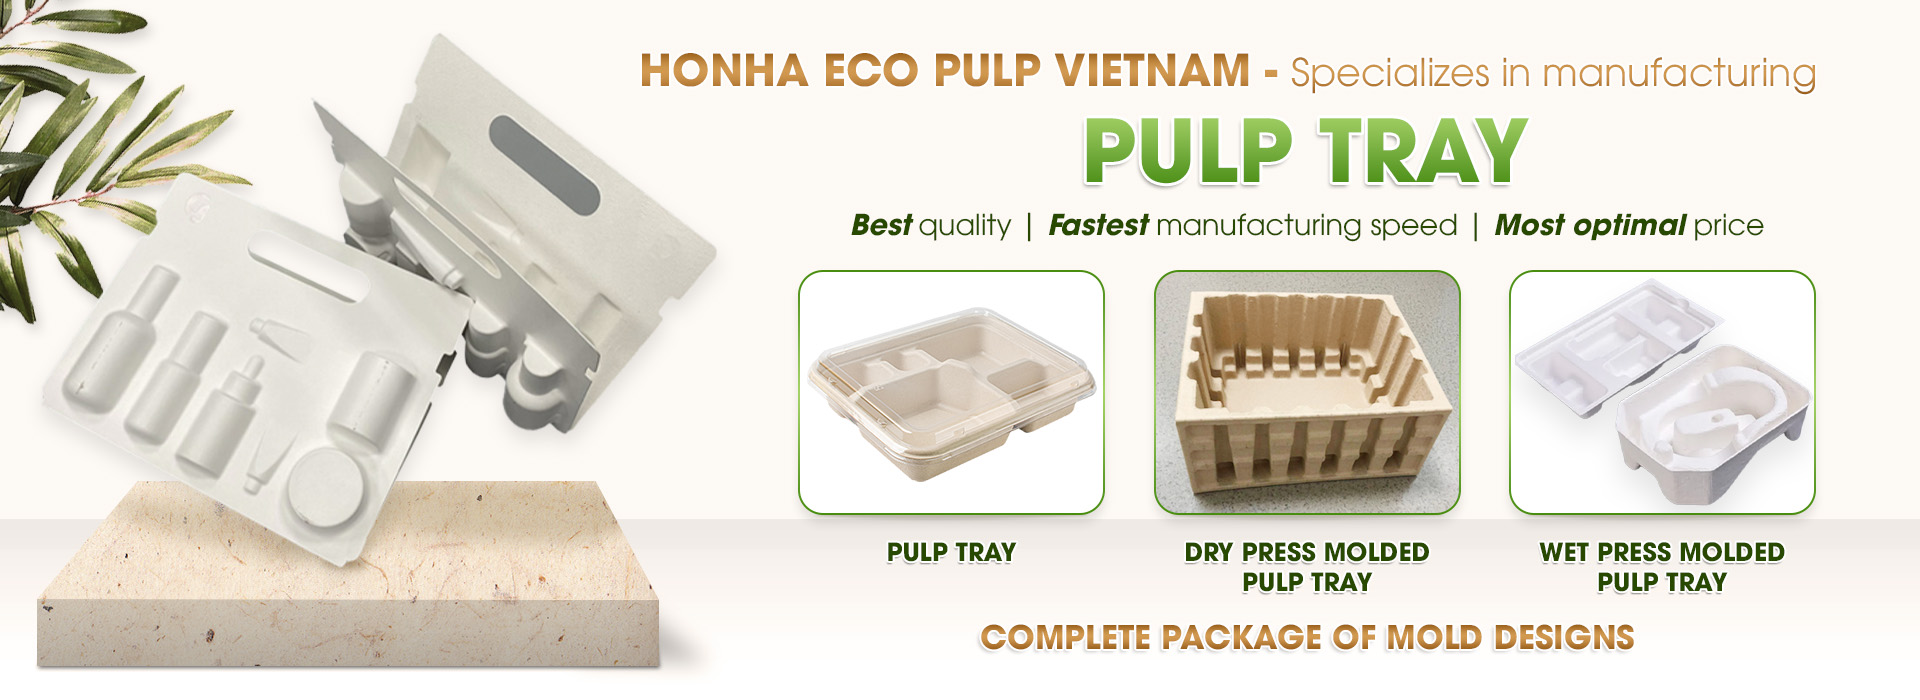 HONHA ECO PULP PACKAGE TECHNOLOGY VIET NAM COMPANY LIMITED